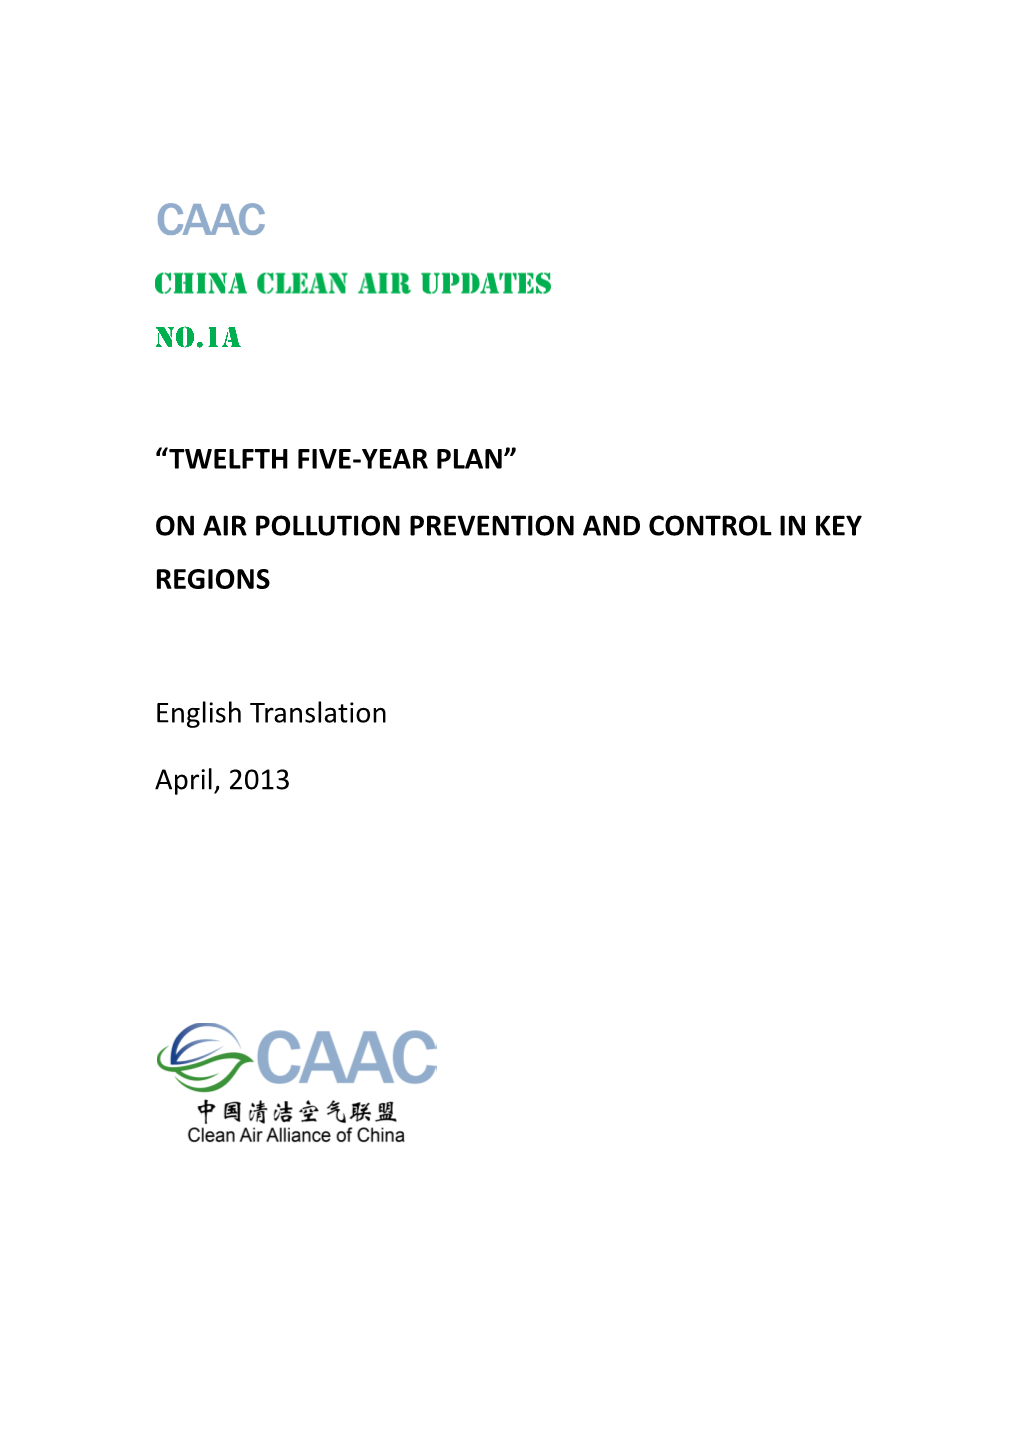 “Twelfth Five-Year Plan” on Air Pollution Prevention And